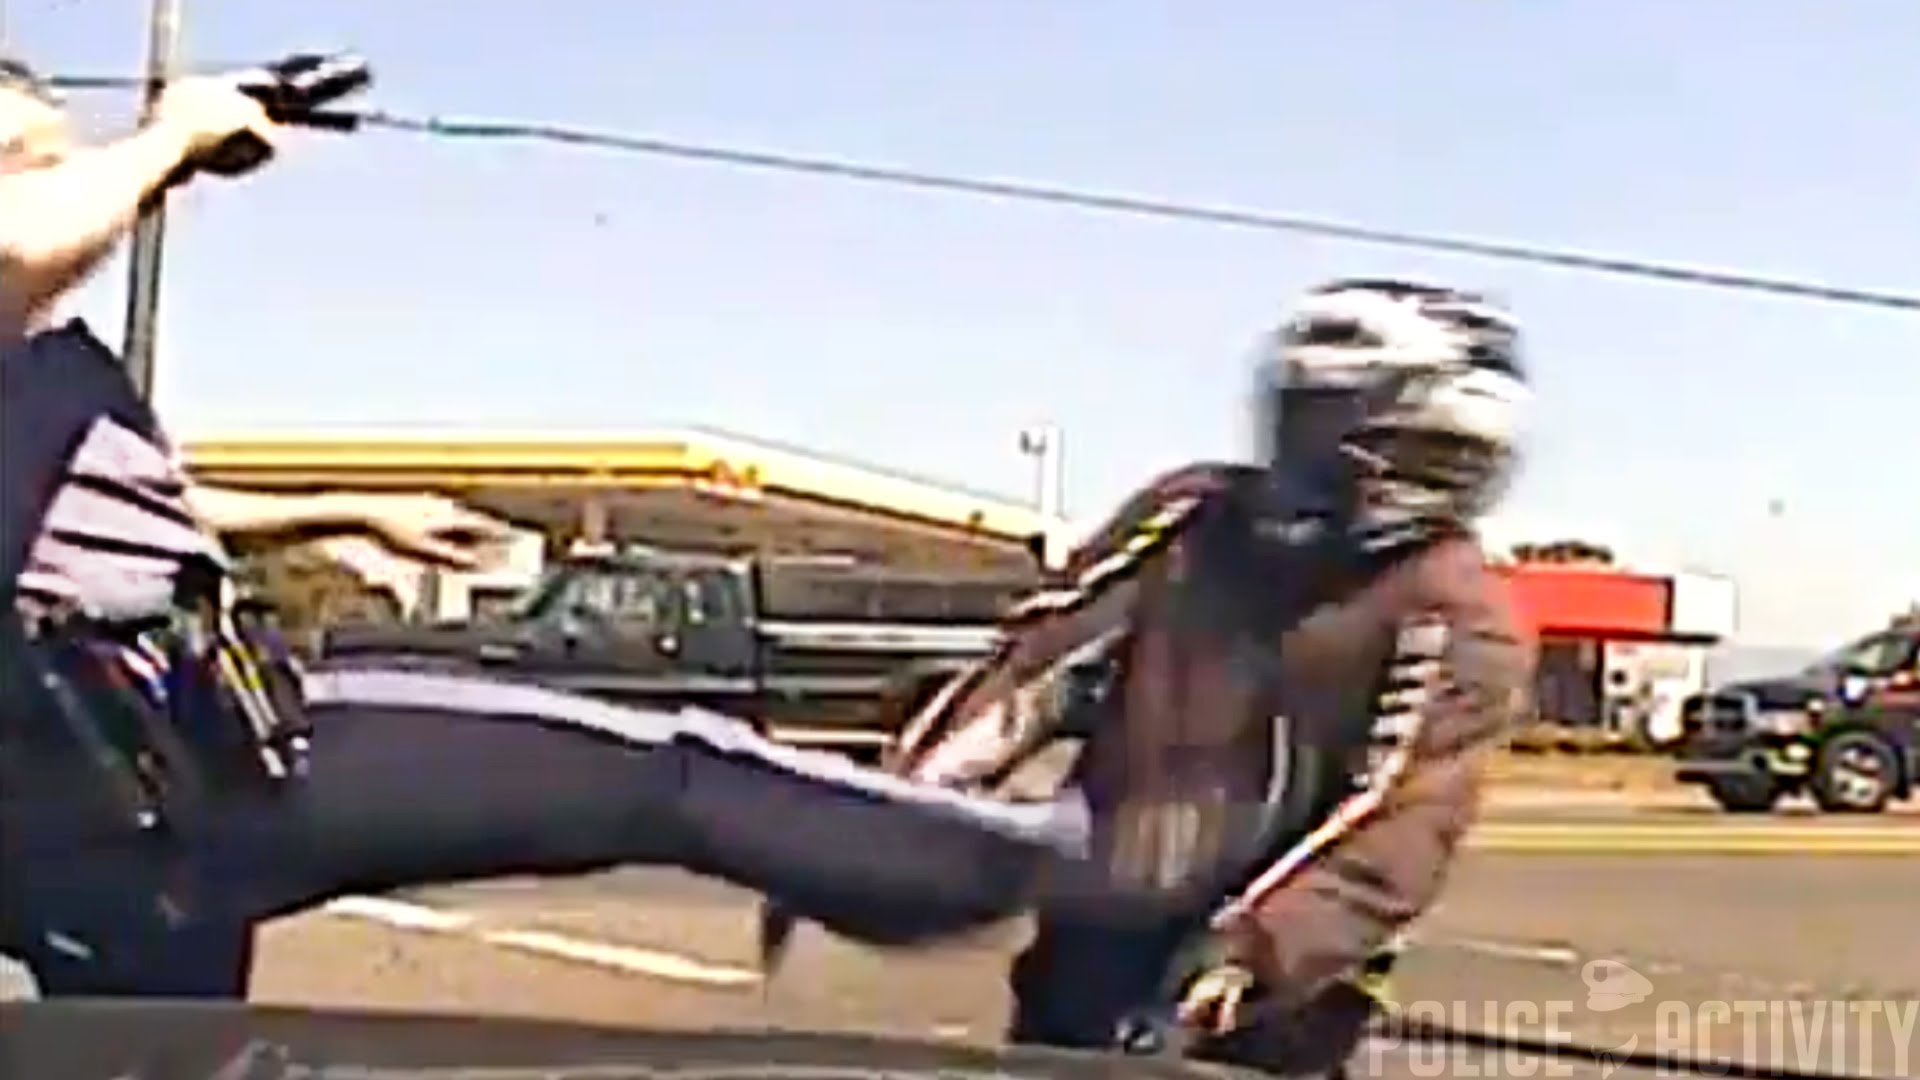 Justice is served to a biker who was the victim of police brutality!